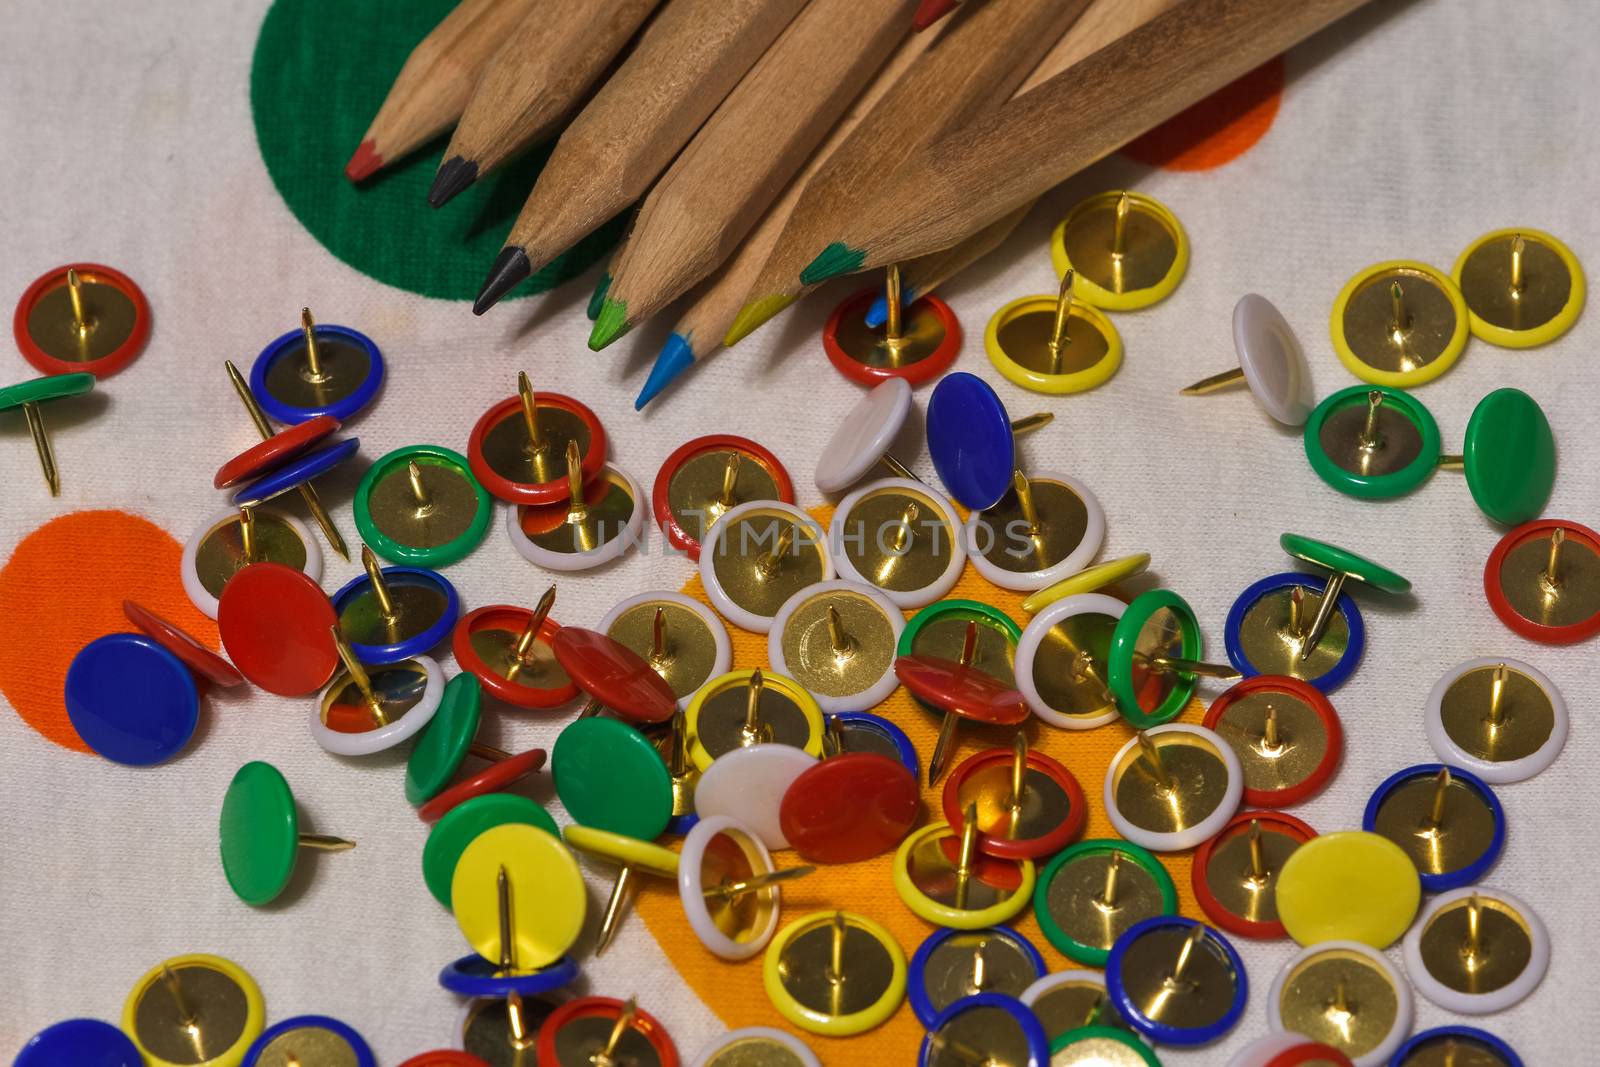 Thumbtacks and colored pencils scattered on a colored plane by brambillasimone